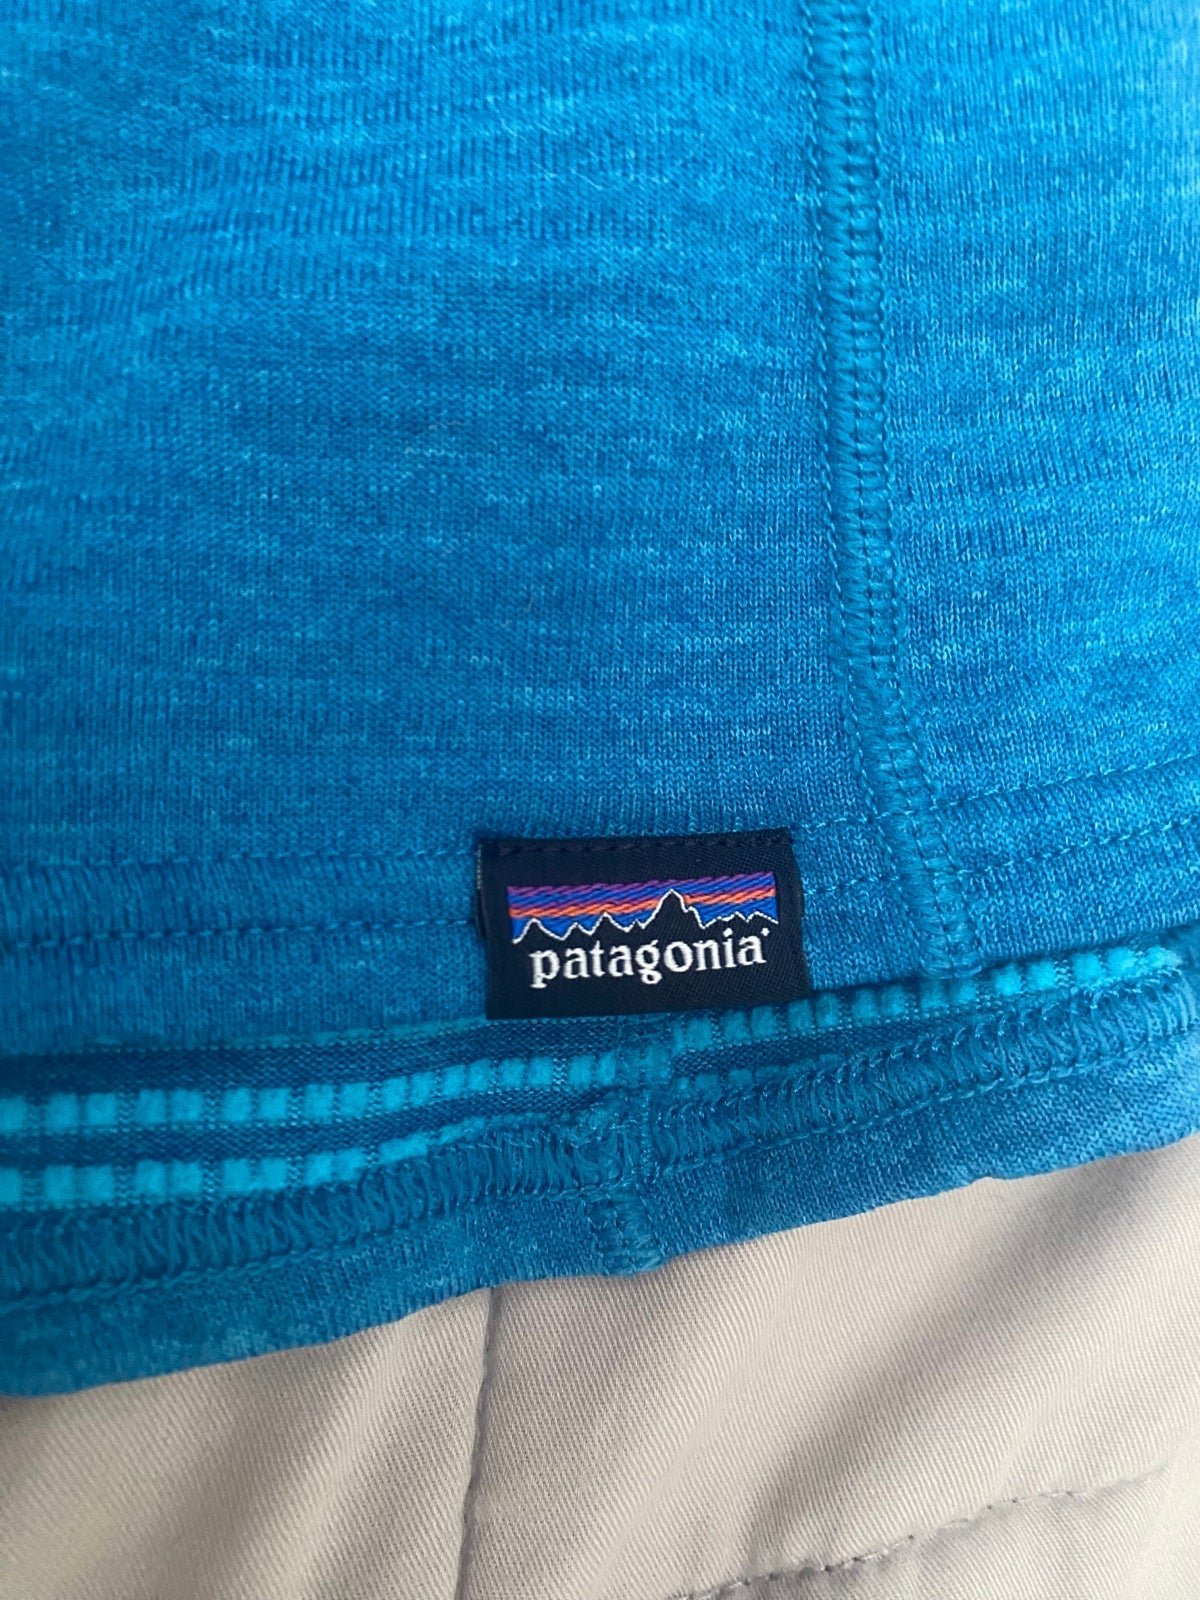 where to buy  Patagonia quarter zip Pullover Top Shirt teal blue J1tFKahcr Hot Sale